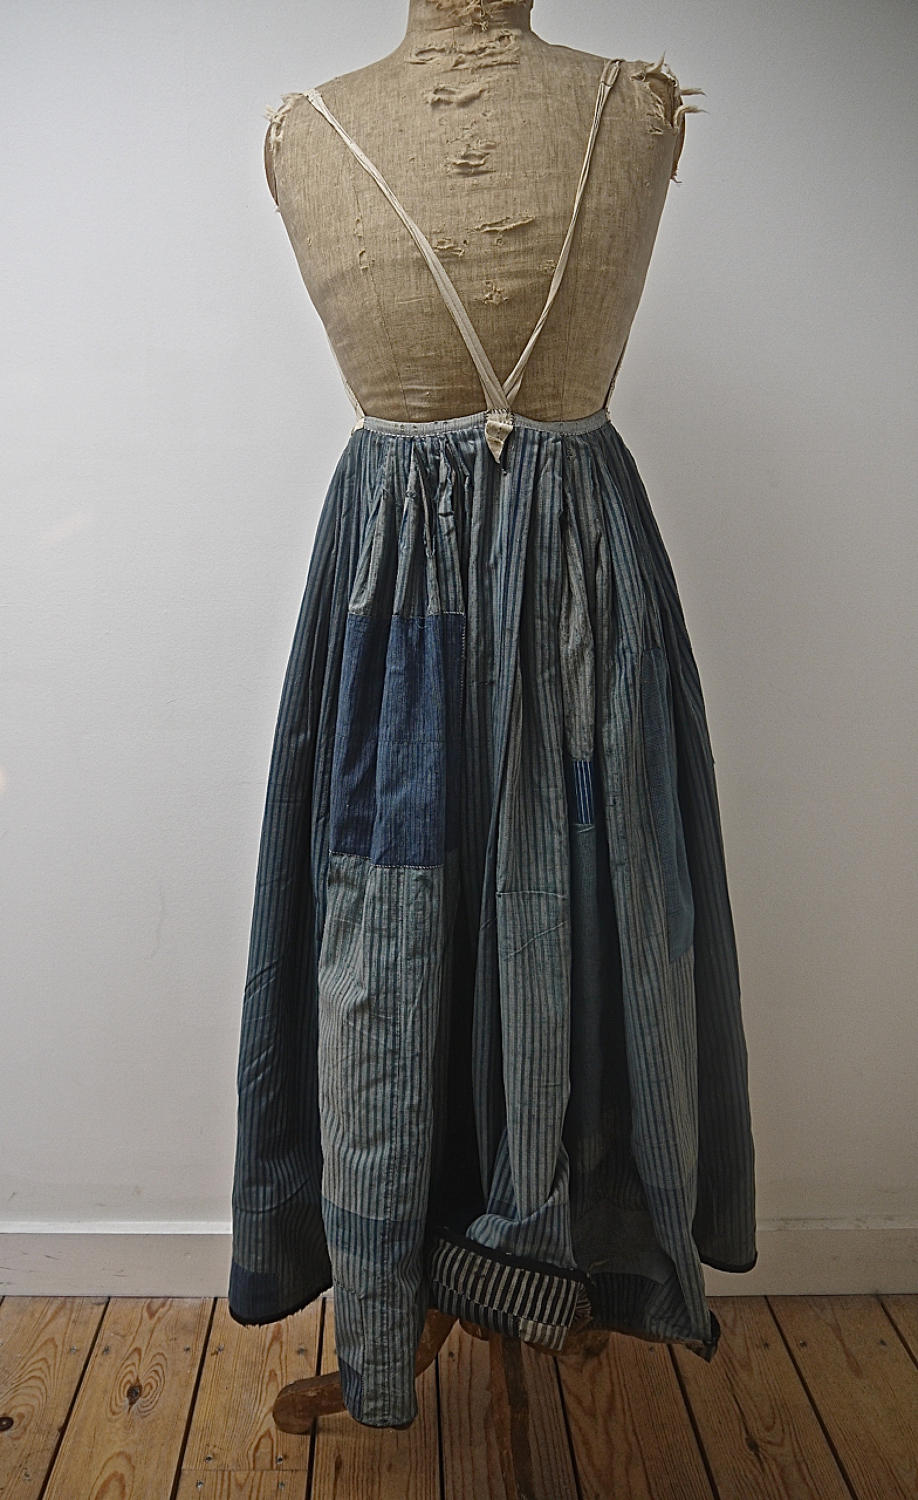 Indigo Cotton Patched Jupon 19th century French